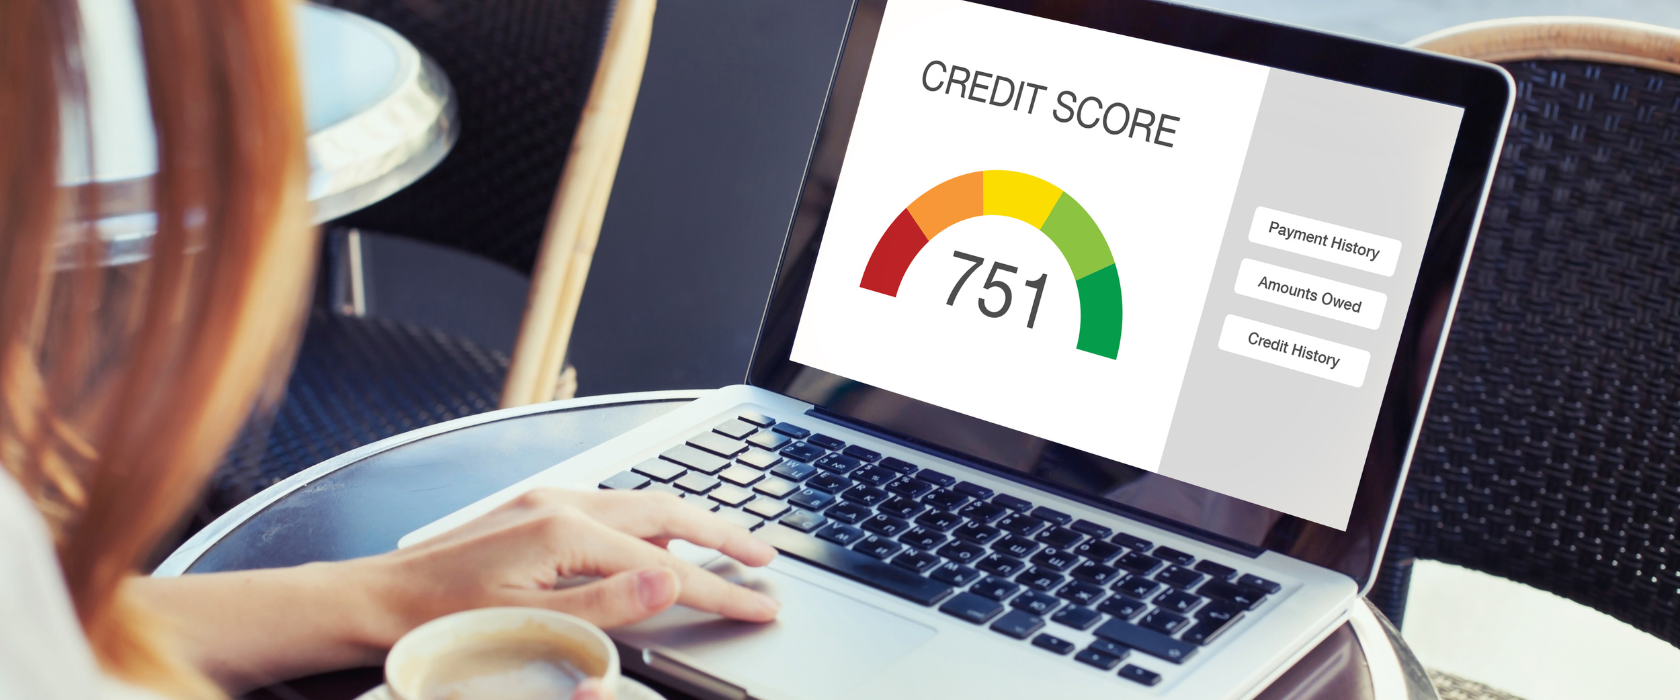 A women looks at a credit score chart that reads 